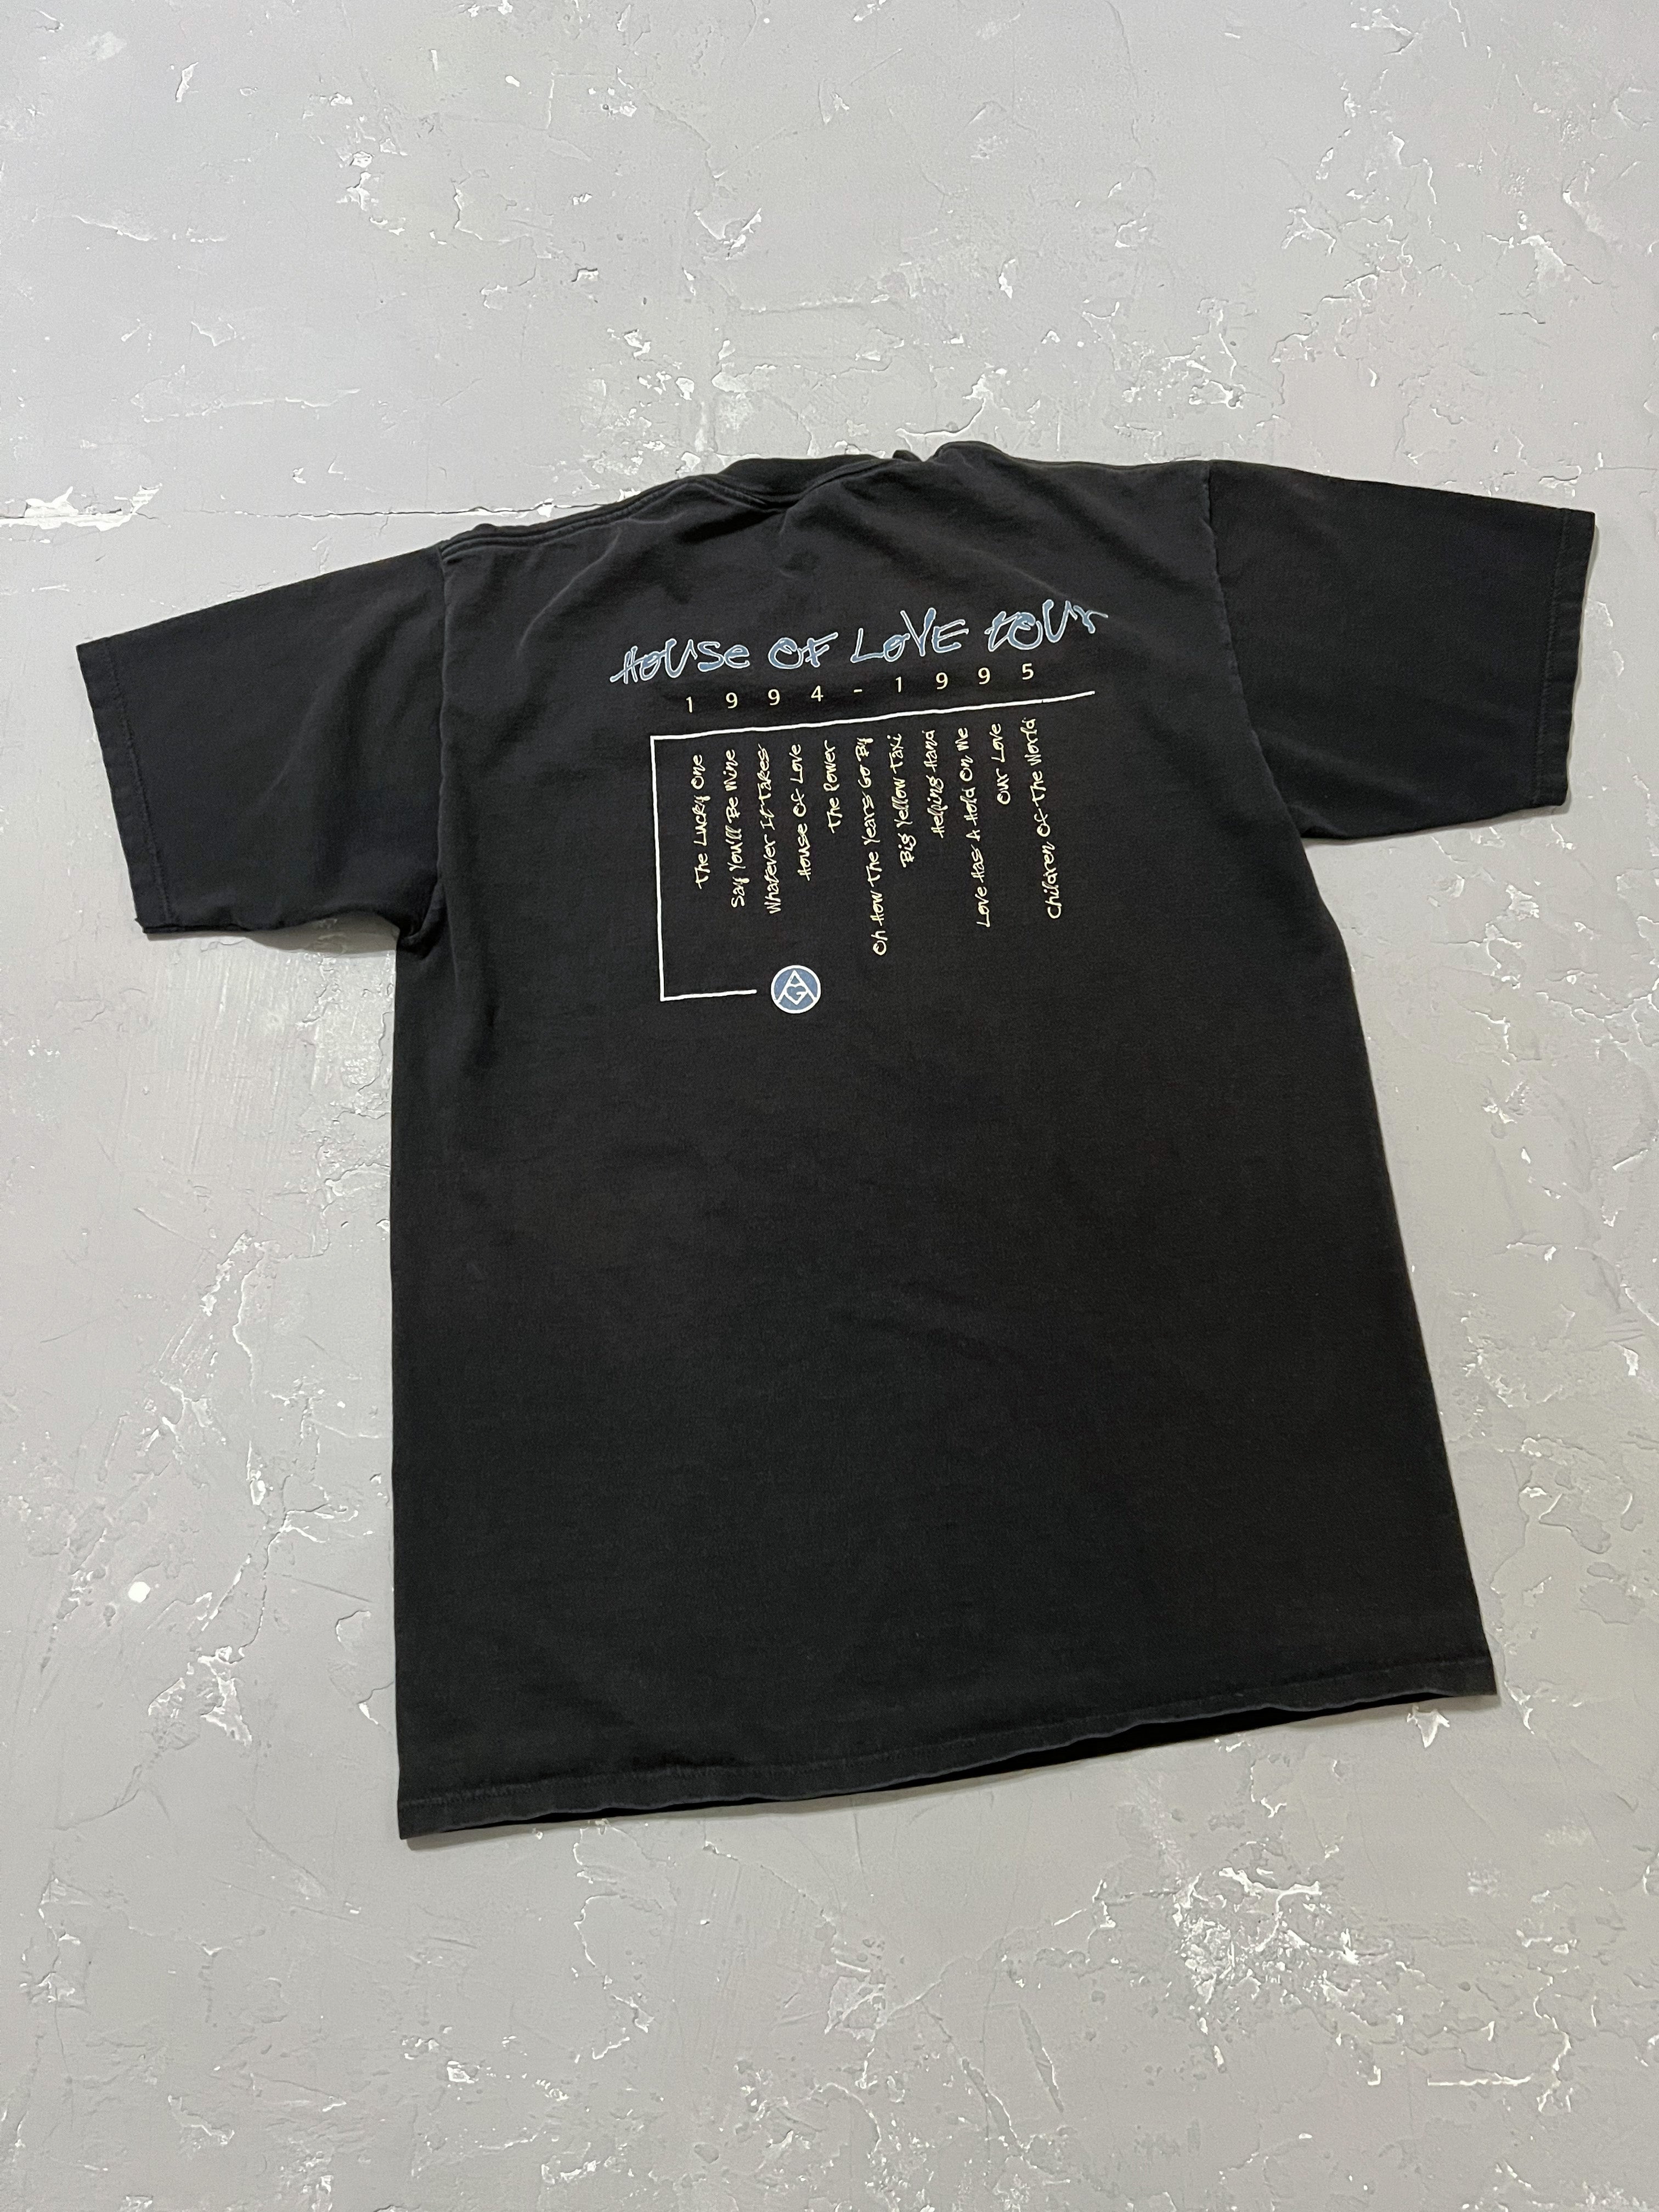 1994 Faded Black Amy Grant Tour Tee [L]